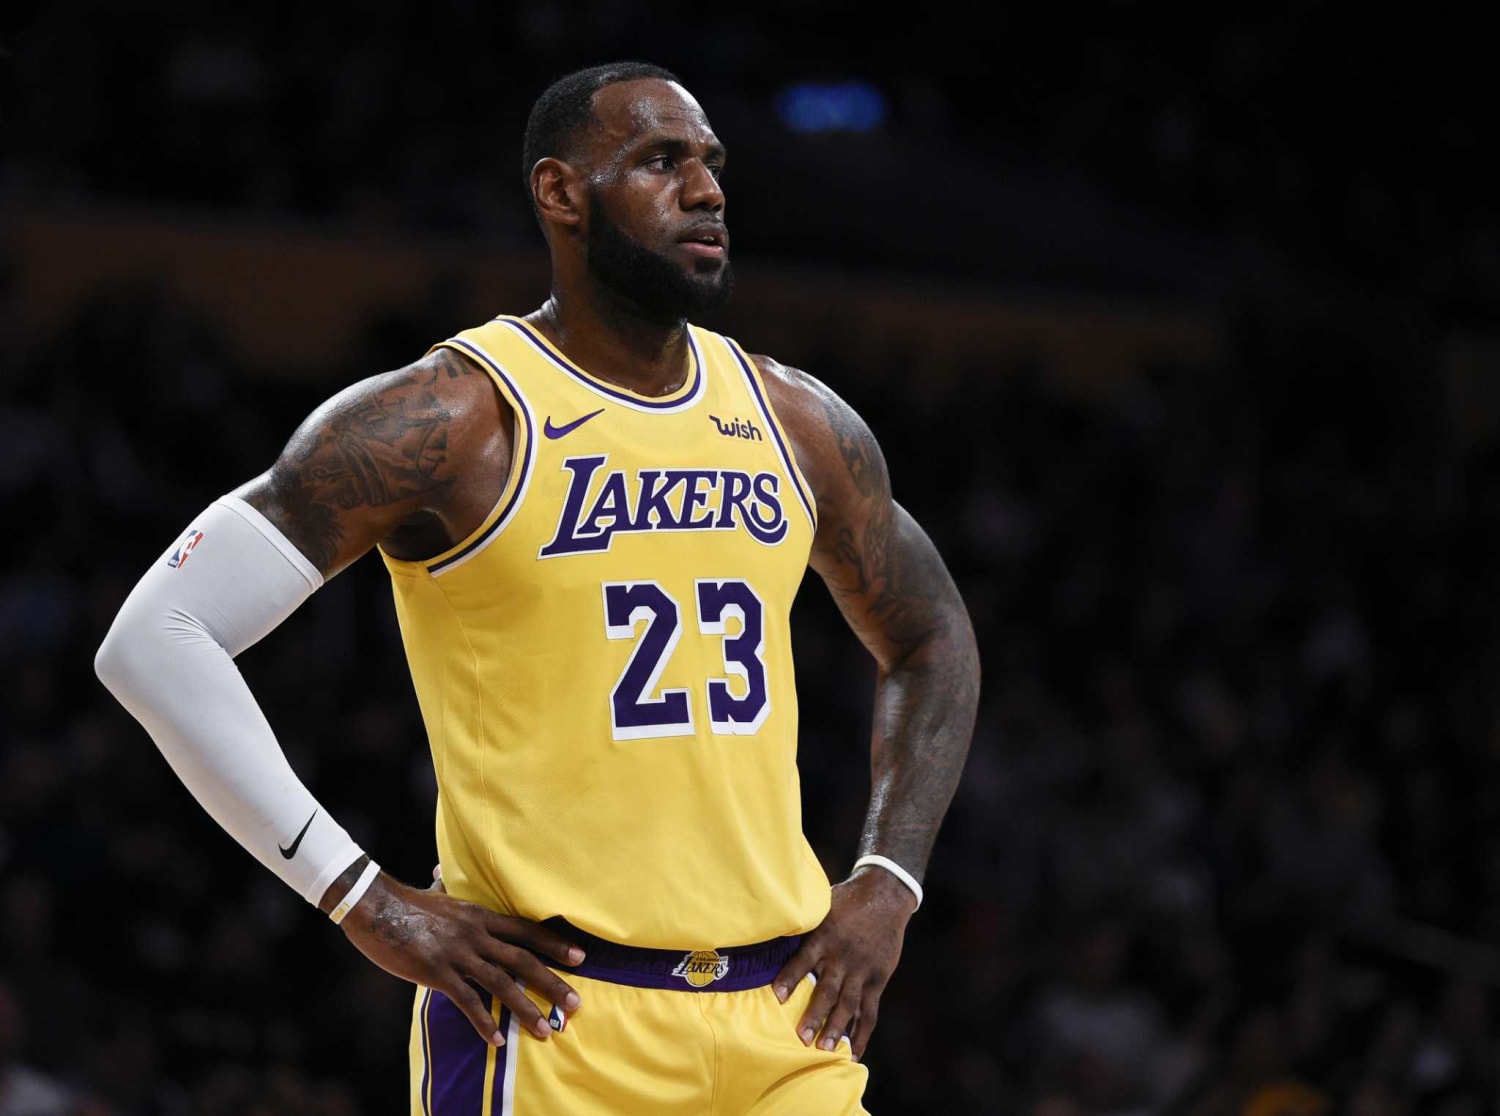 LeBron James, told by Laura Ingraham to 'shut up and dribble,' calls her out over Drew Brees